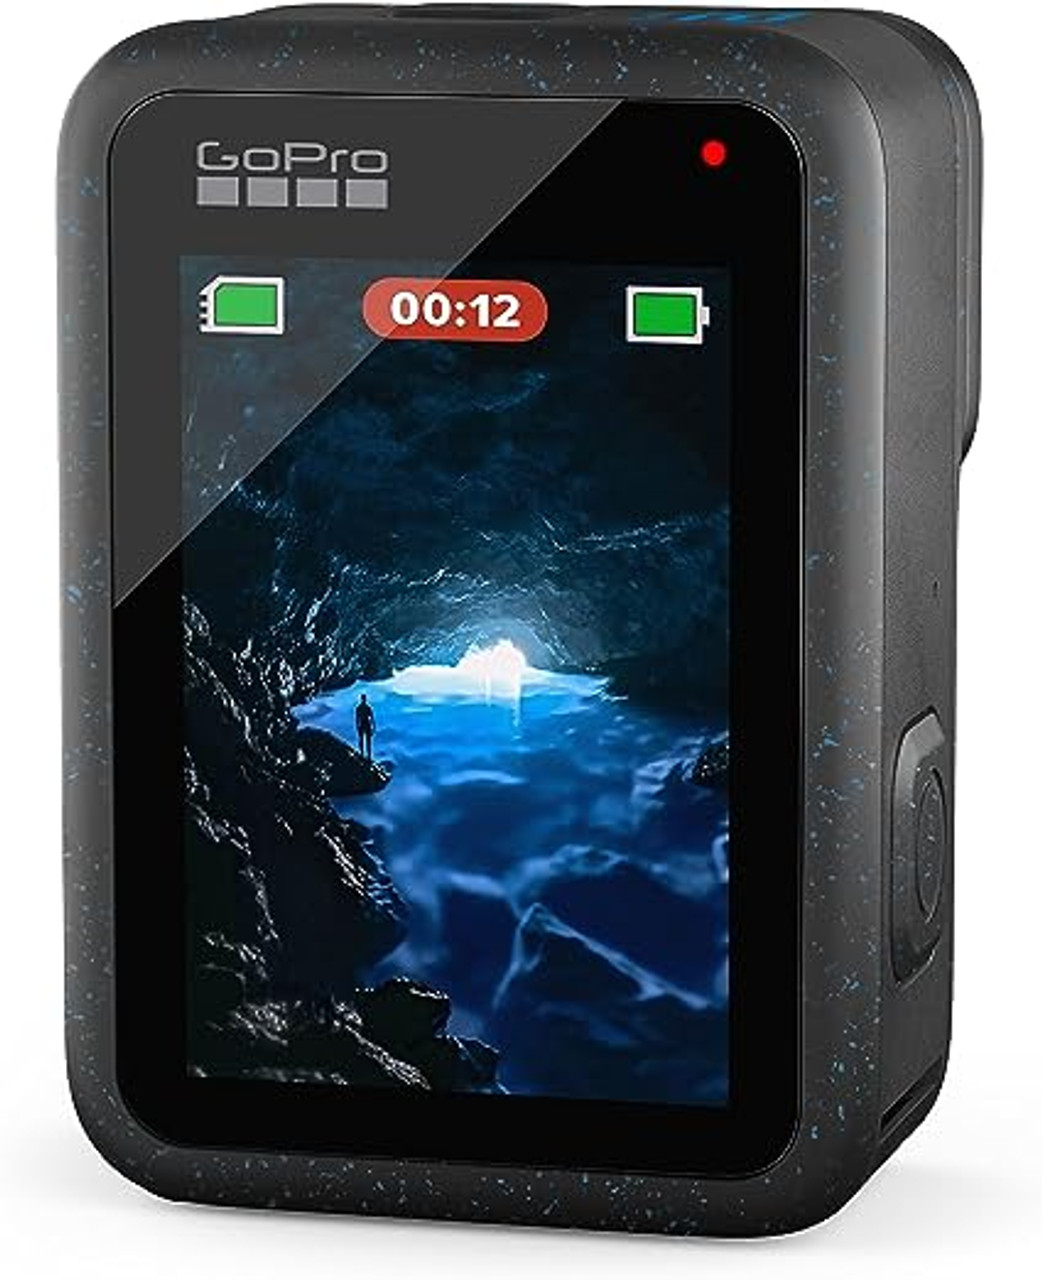 GoPro MAX Waterproof 360 + Traditional Camera with Touch Screen Spherical  5.6K30 HD Video 16.6MP 360 Photos 1080p Live Streaming Stabilization Bundle